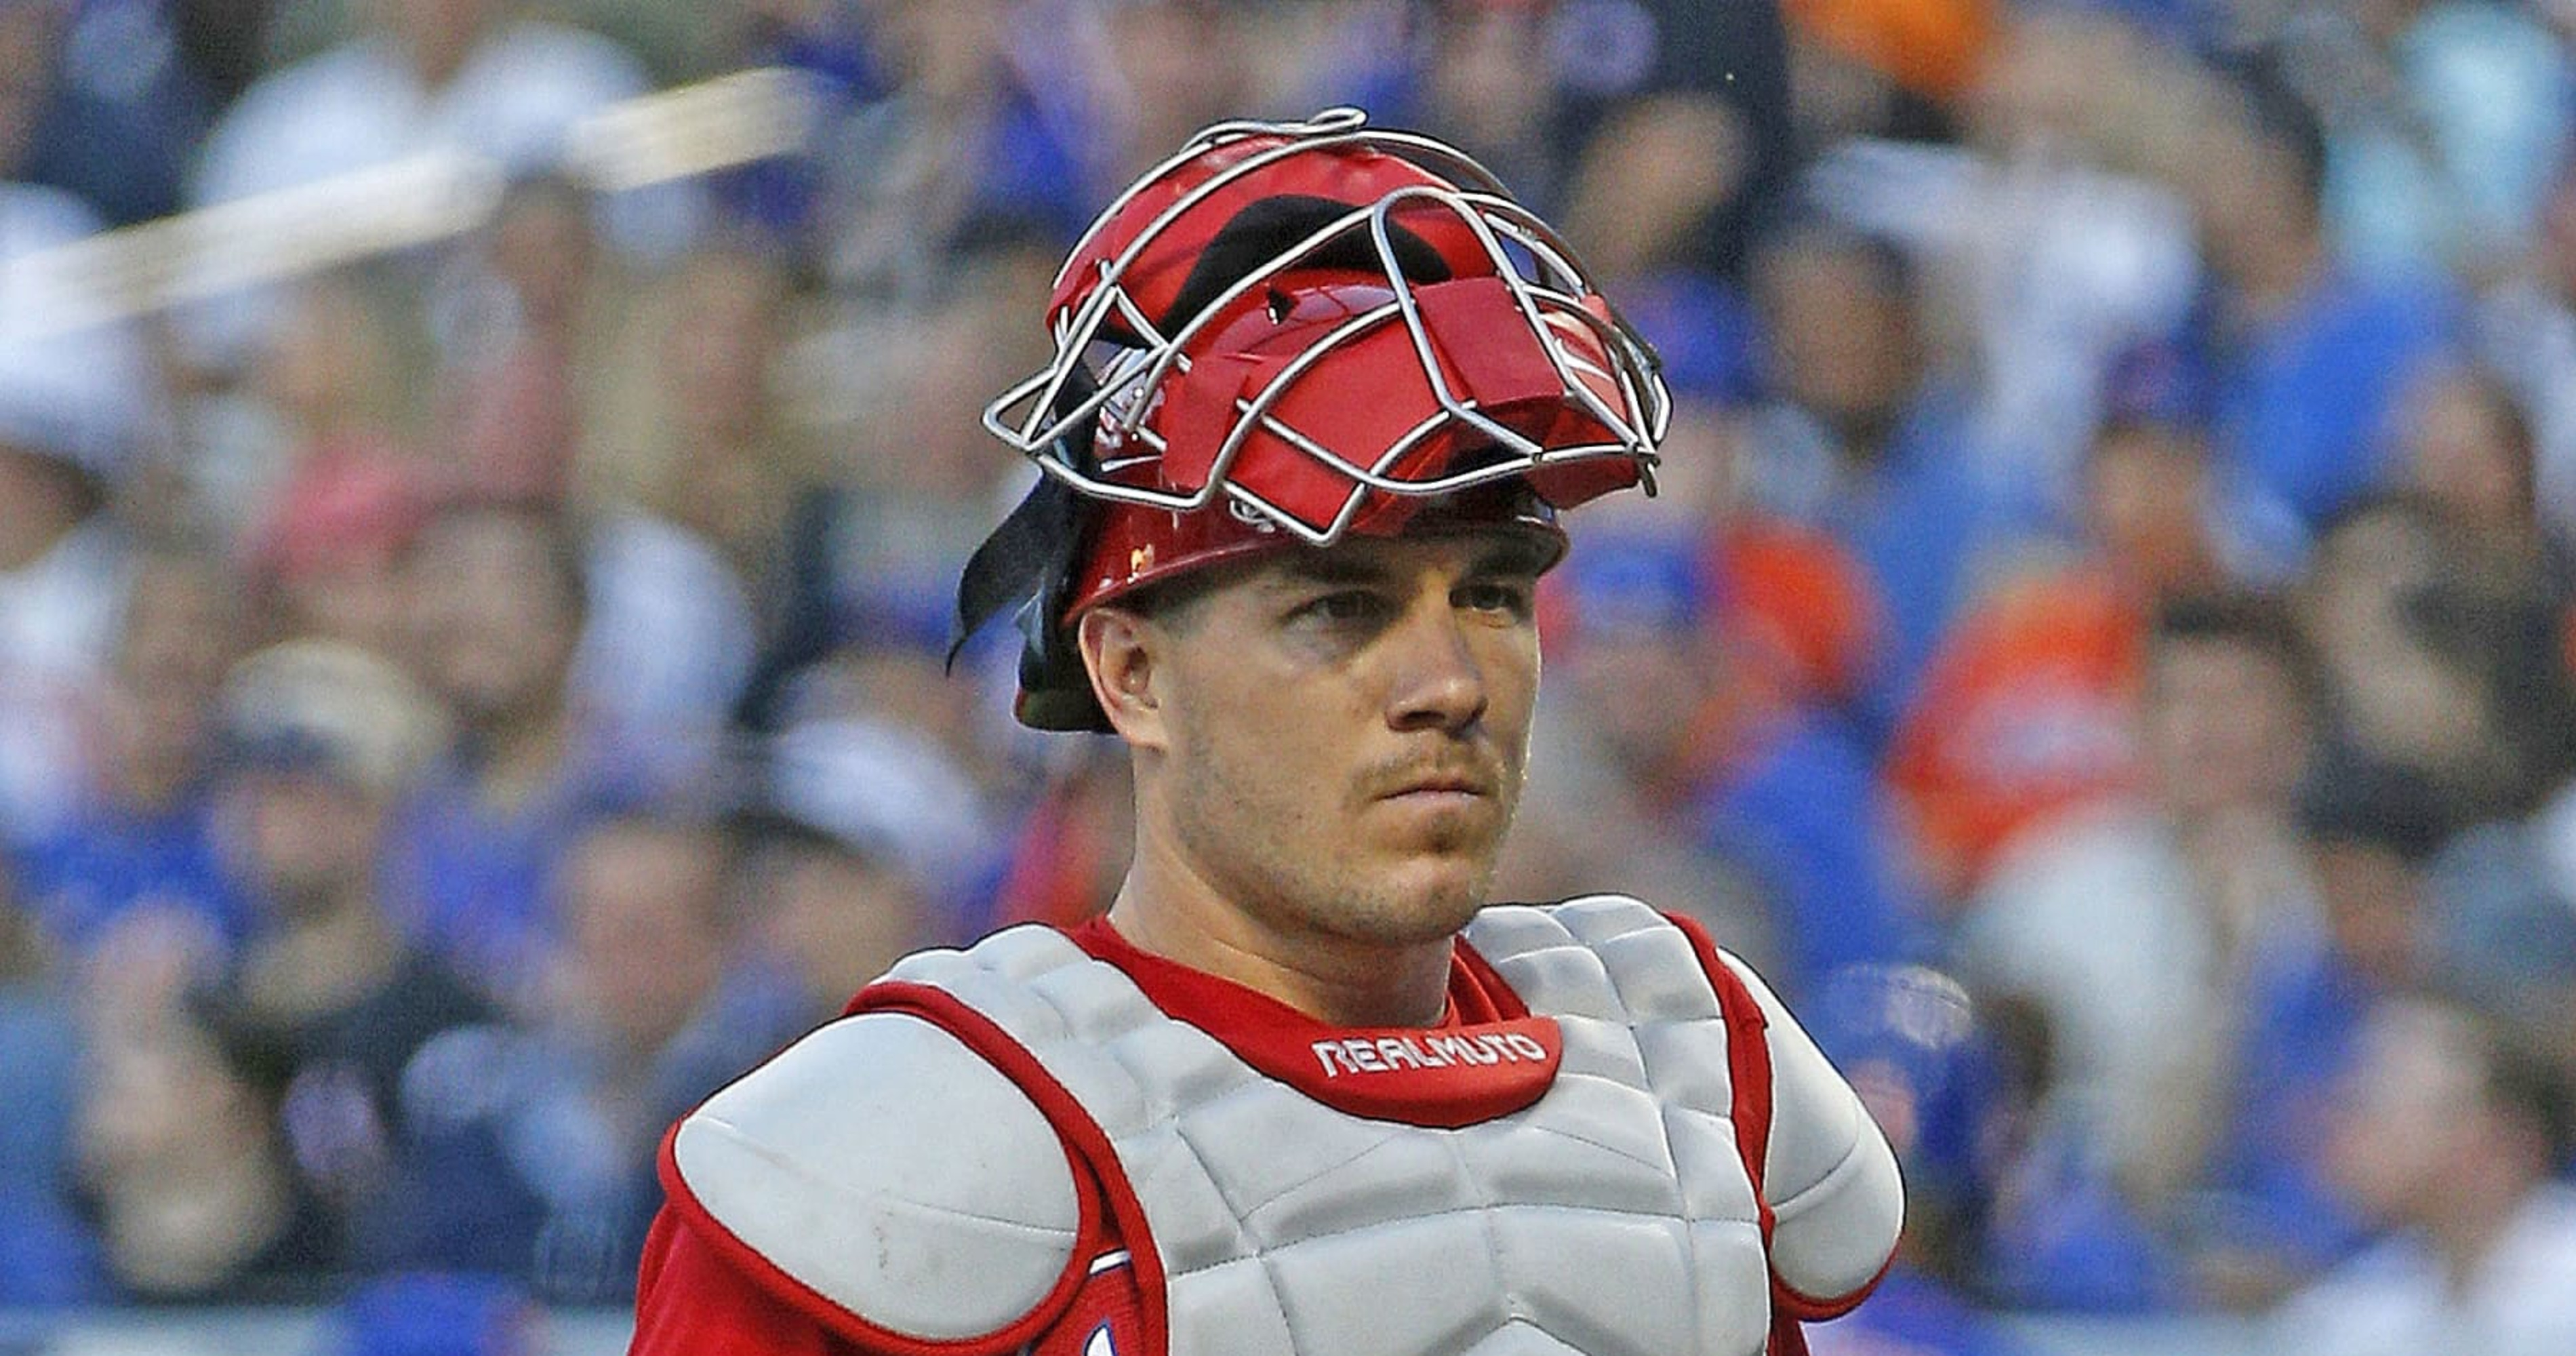 Phillies' Catcher J.T. Realmuto Makes MLB History: 'The No. 1 Thing I Am Is  A Follower of Christ